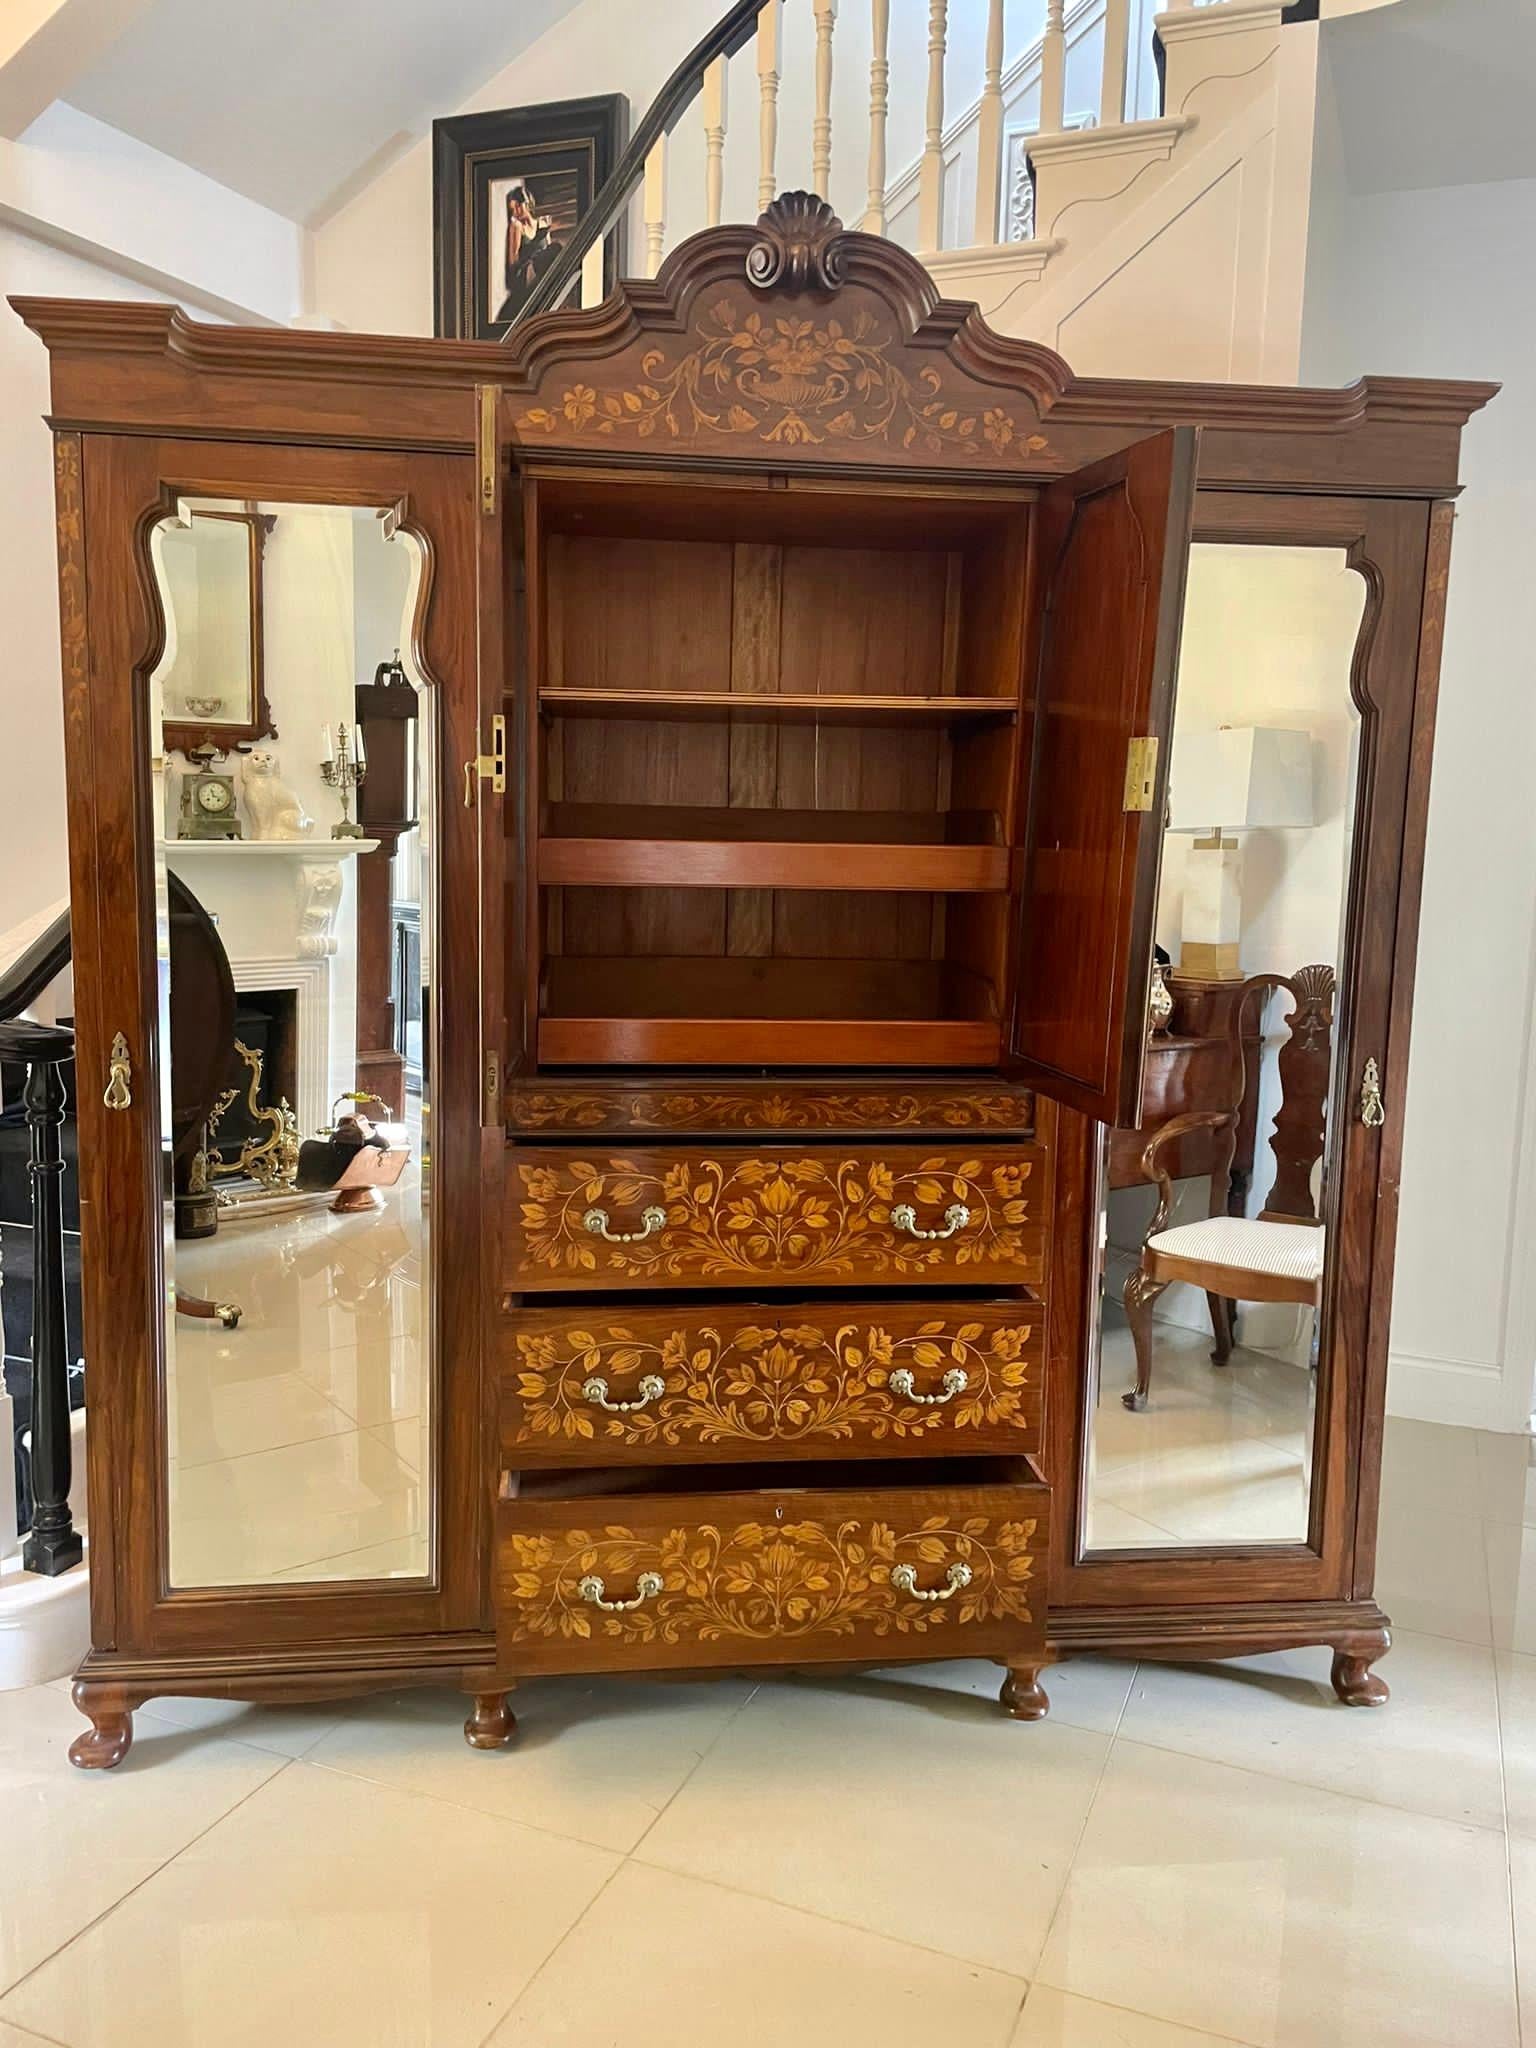 Outstanding quality large antique Victorian figured walnut floral marquetry inlaid wardrobe 
having an outstanding quality figured walnut floral marquetry inlaid carved cornice above a pair of moulded panelled floral marquetry inlaid doors opening